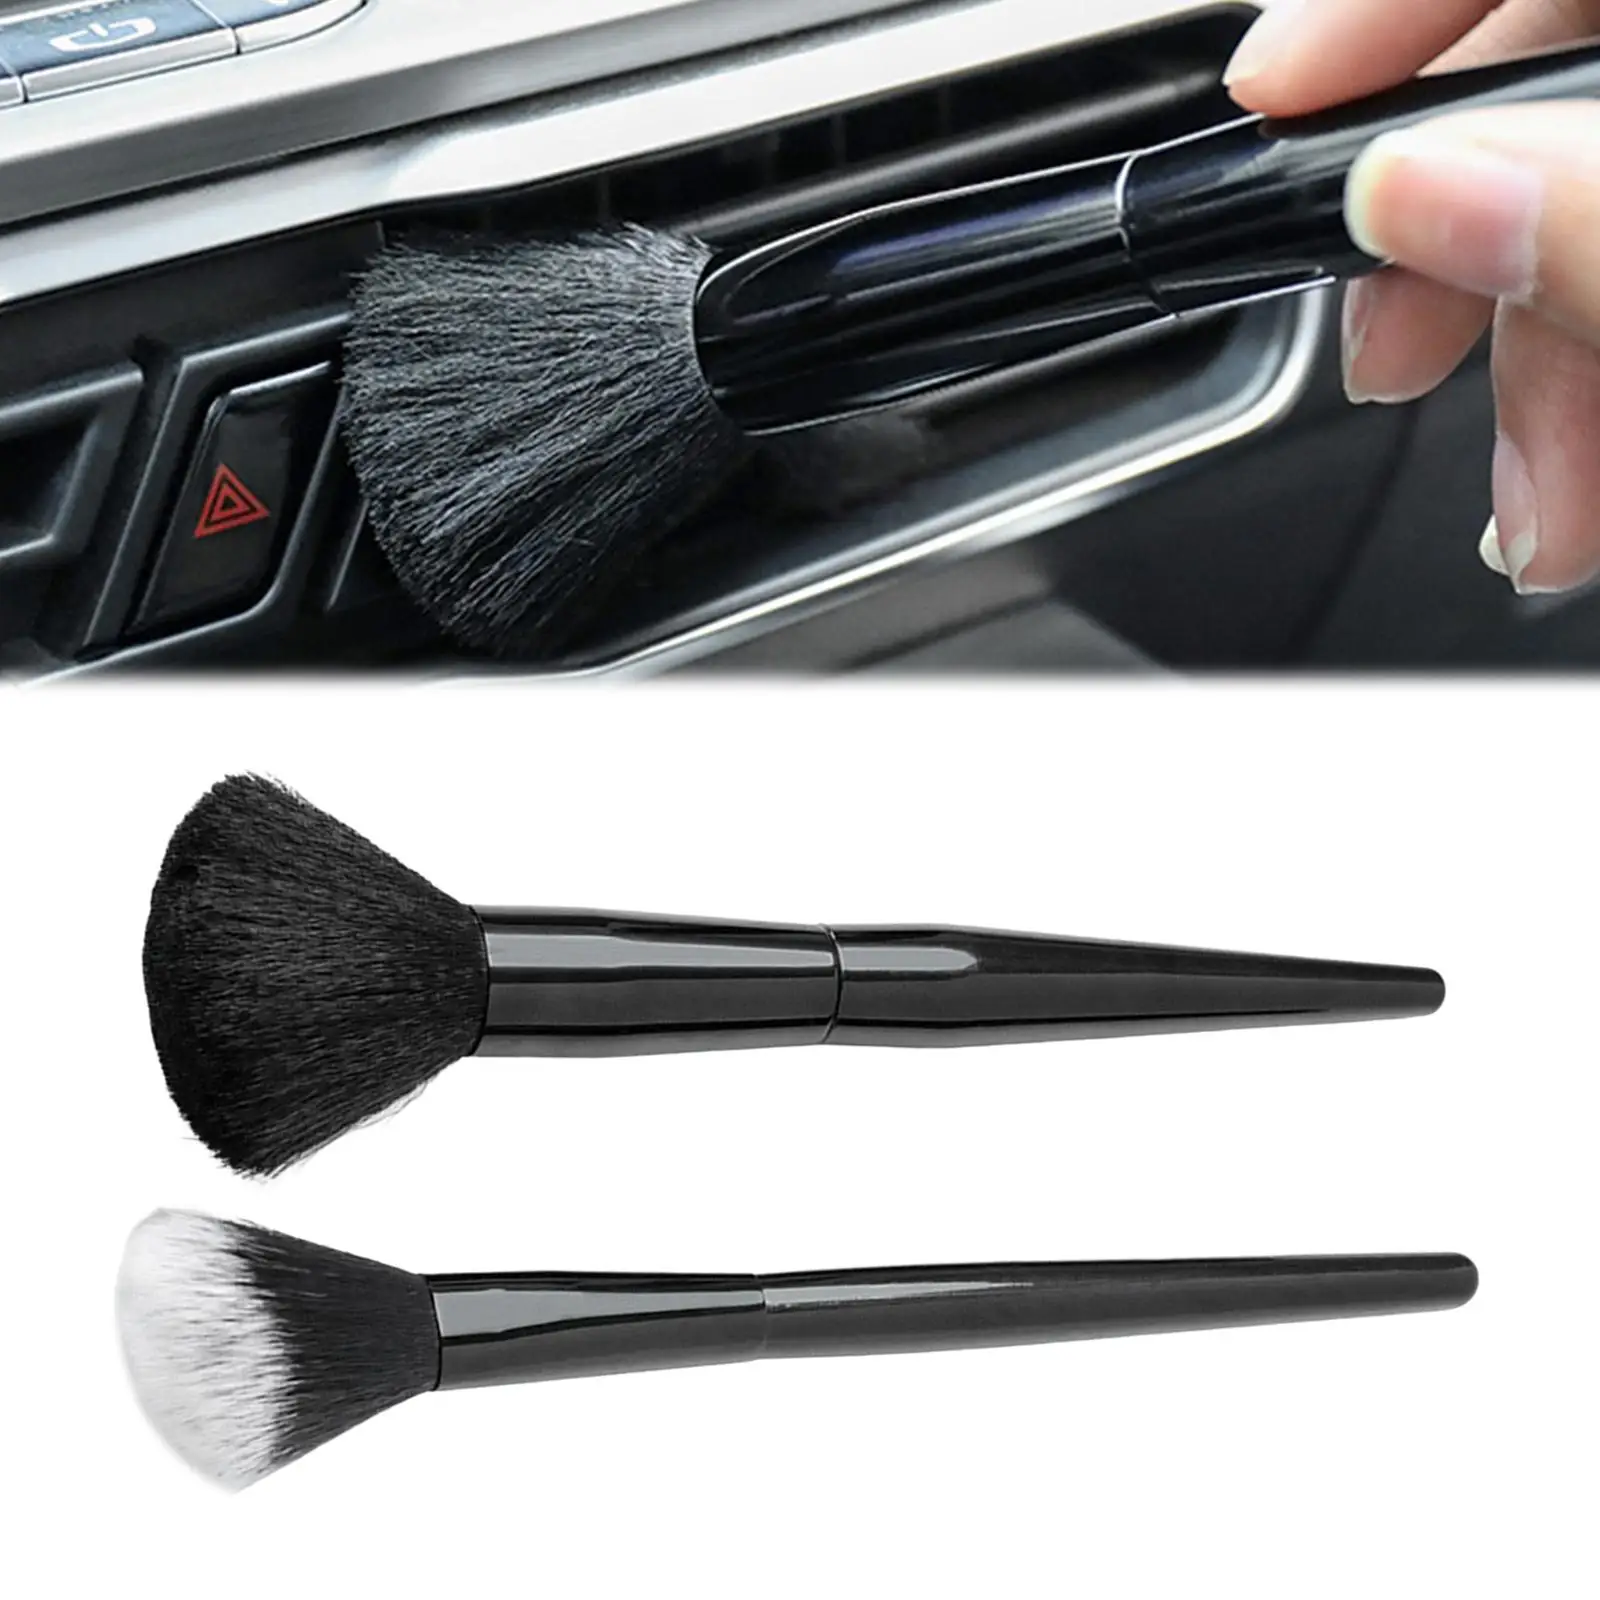 2x Car Detailing Brush Detail Cleaning Brushes for Computer Keyboard